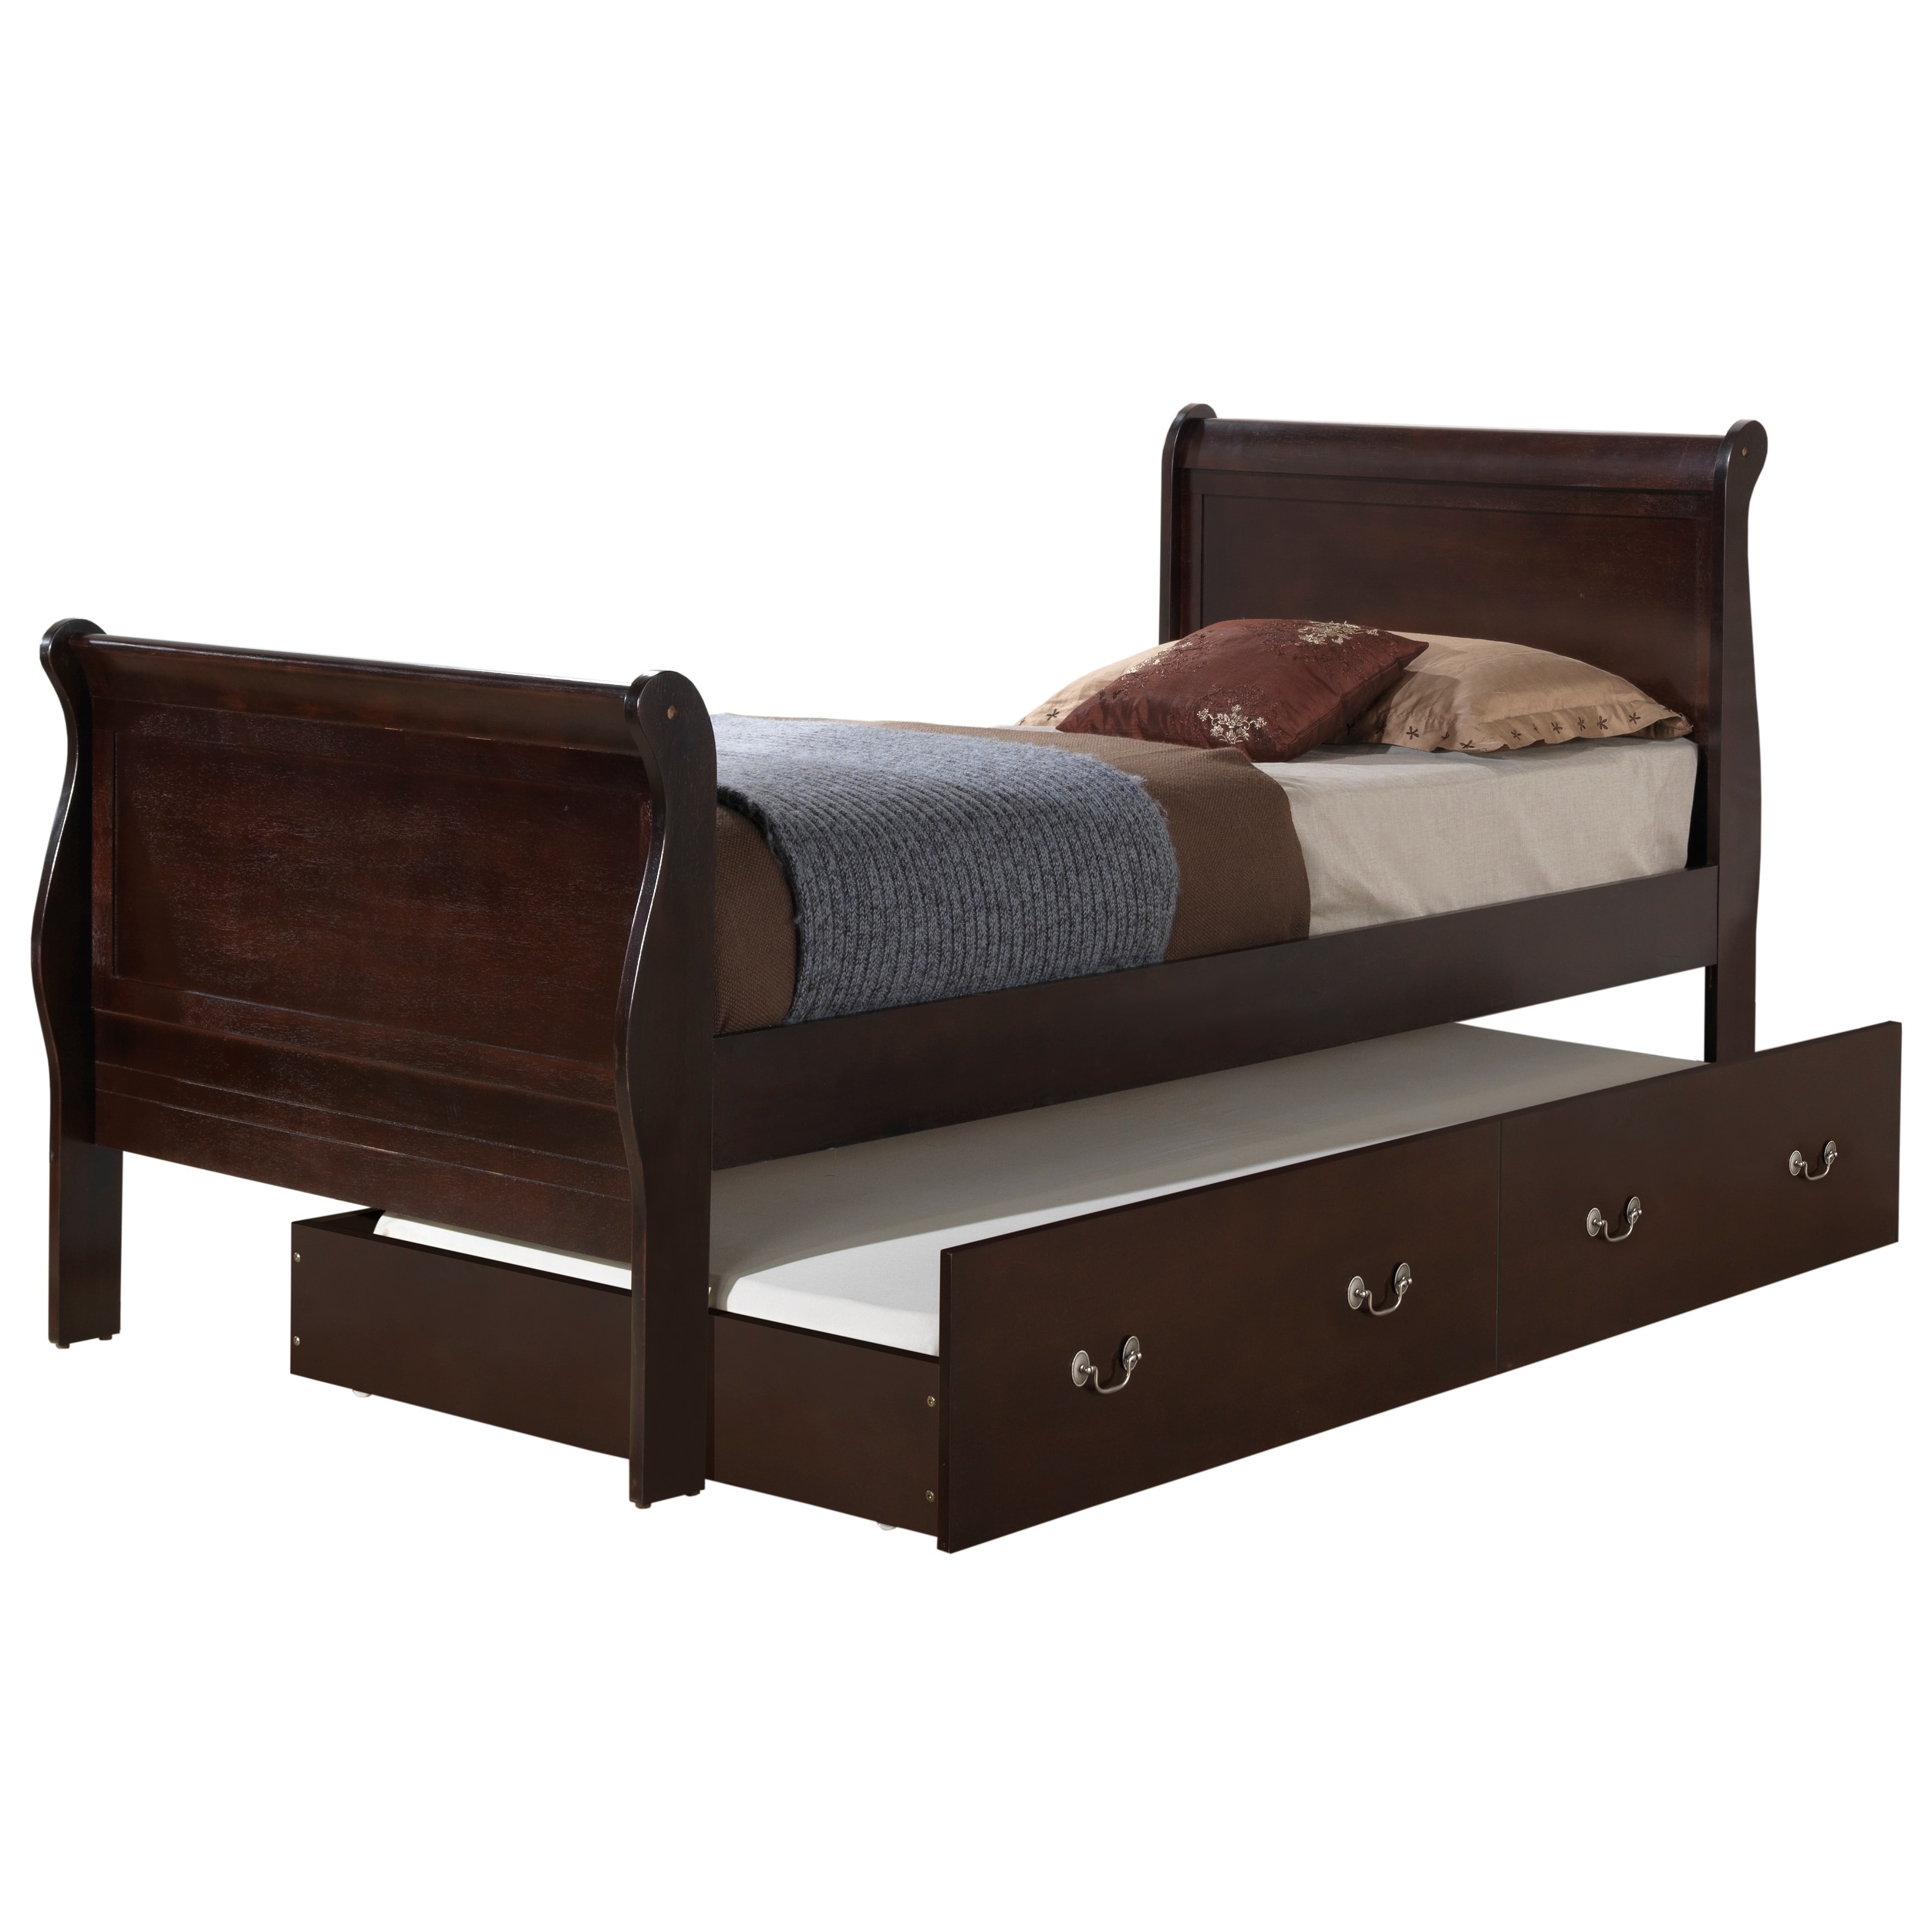  Glory Furniture Louis Phillipe King Storage Bed in Cherry :  Home & Kitchen